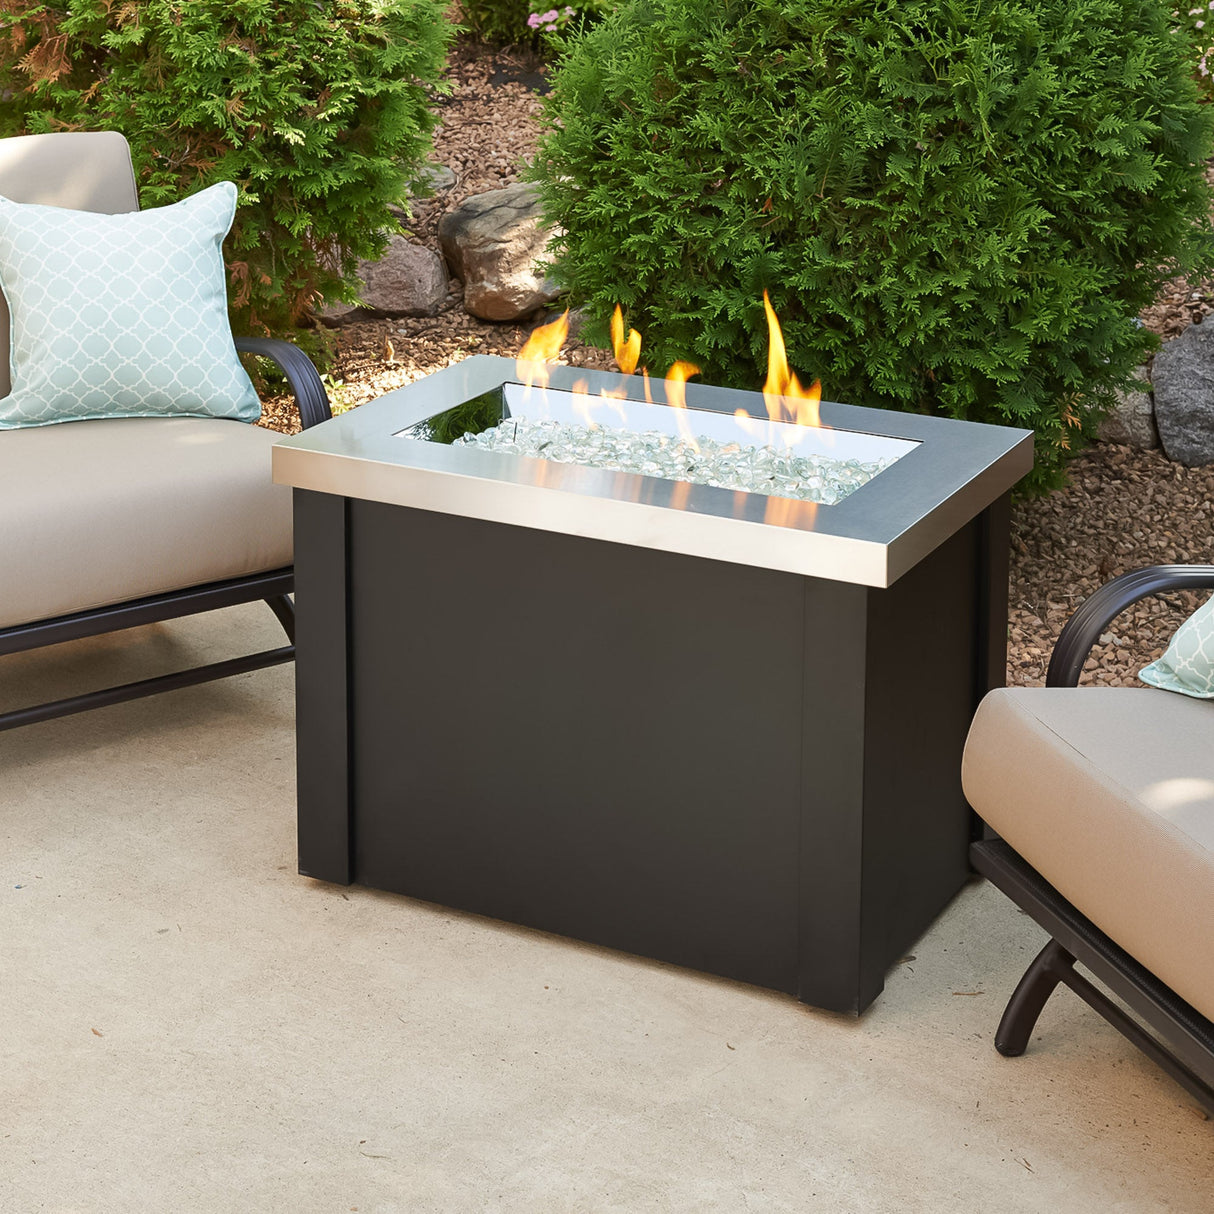 The Providence Rectangular Gas Fire Pit Table placed on a patio with furniture surrounding it